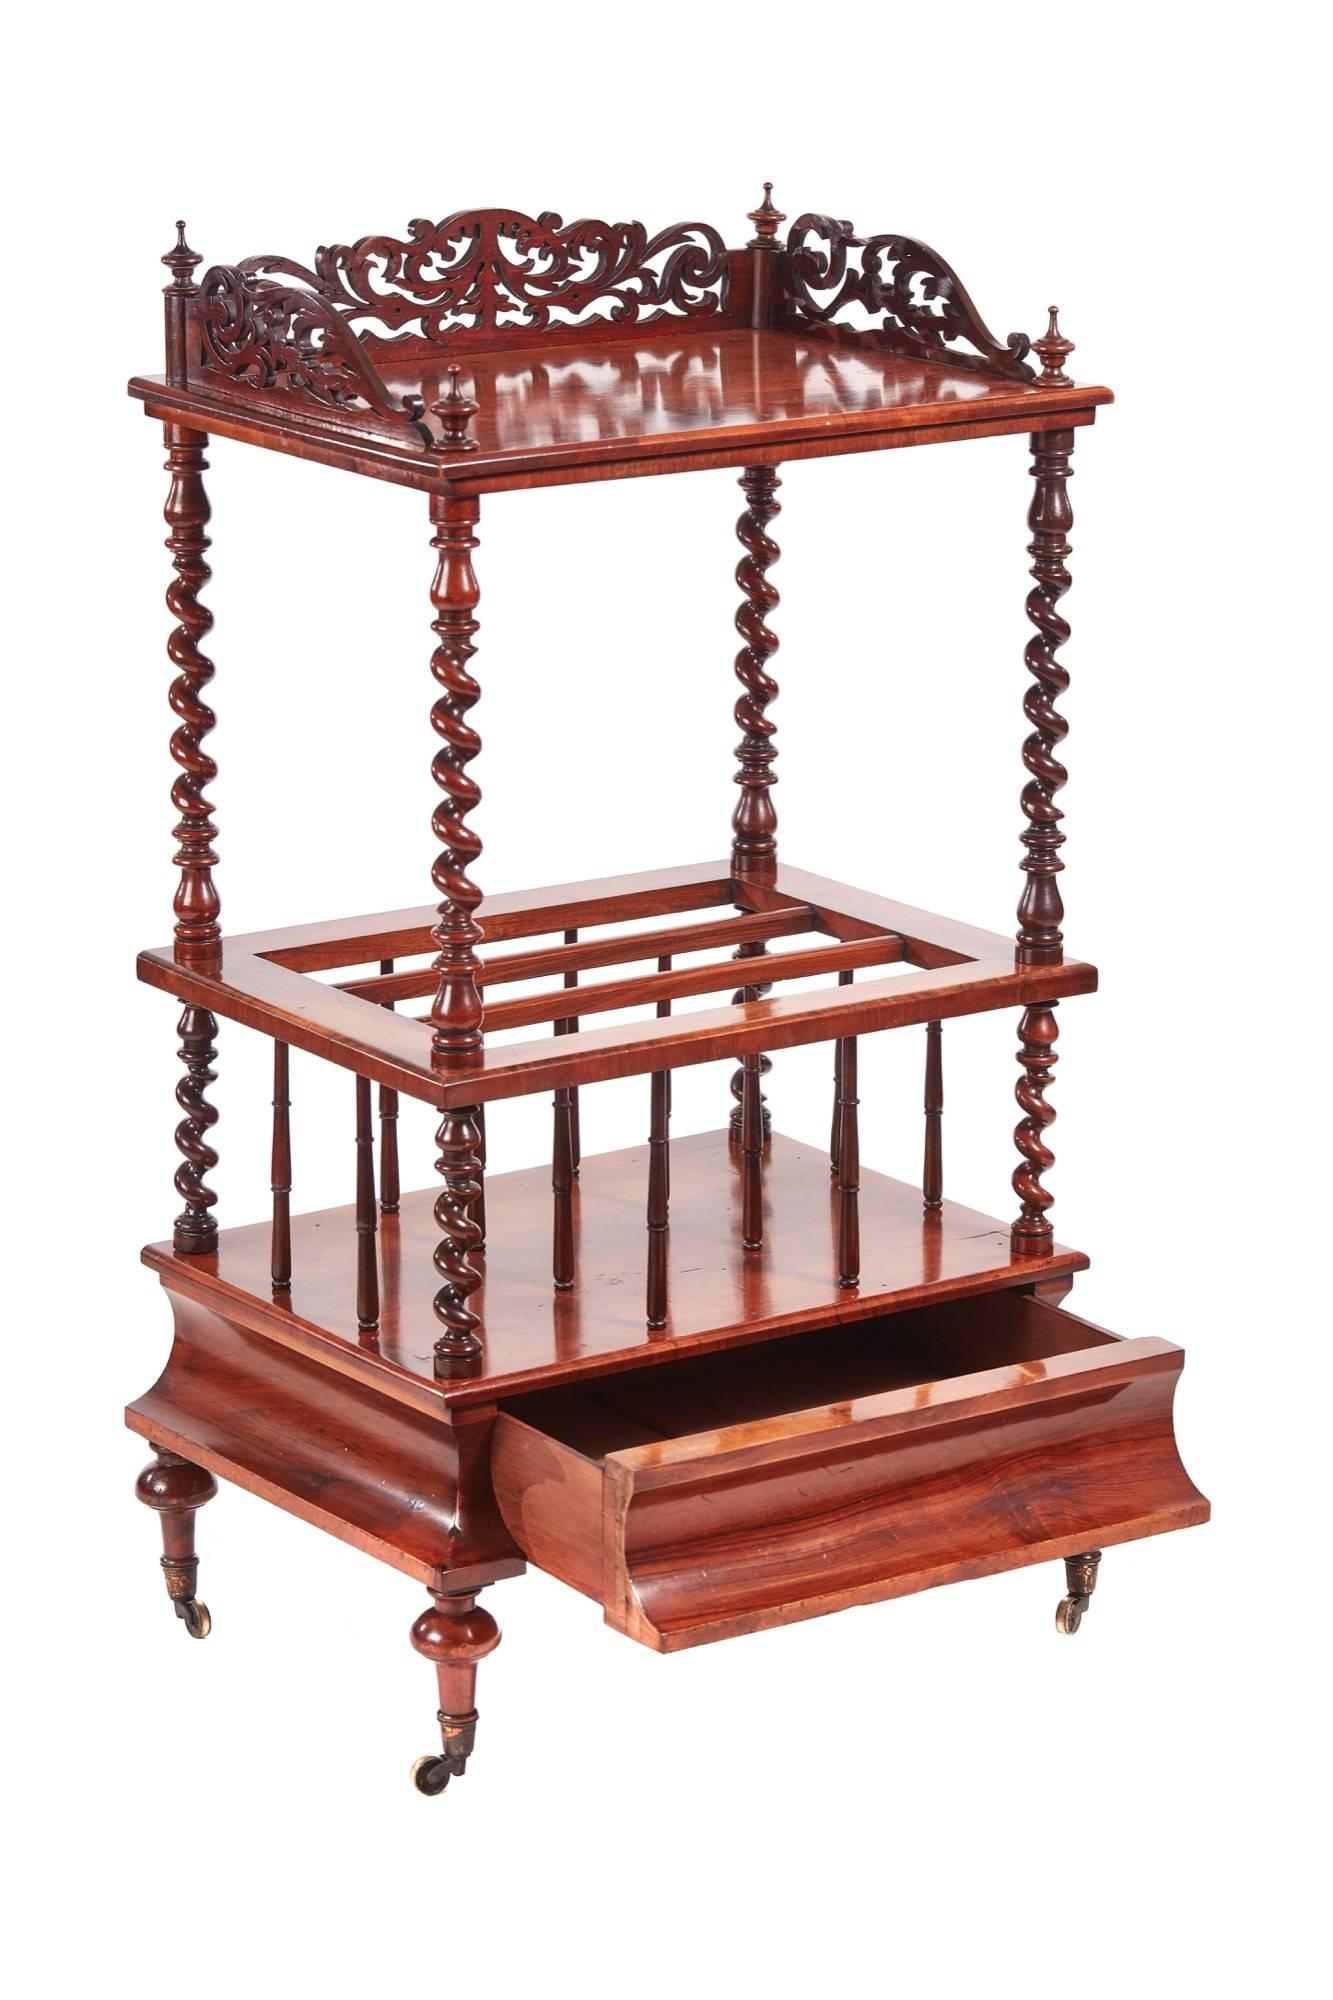 Victorian burr walnut canterbury whatnot, with a shaped fretwork gallery, lovely burr walnut top, solid walnut barley twist supports, three divisions supported by lovely turning, one walnut shaped drawer, standing on short turned legs original